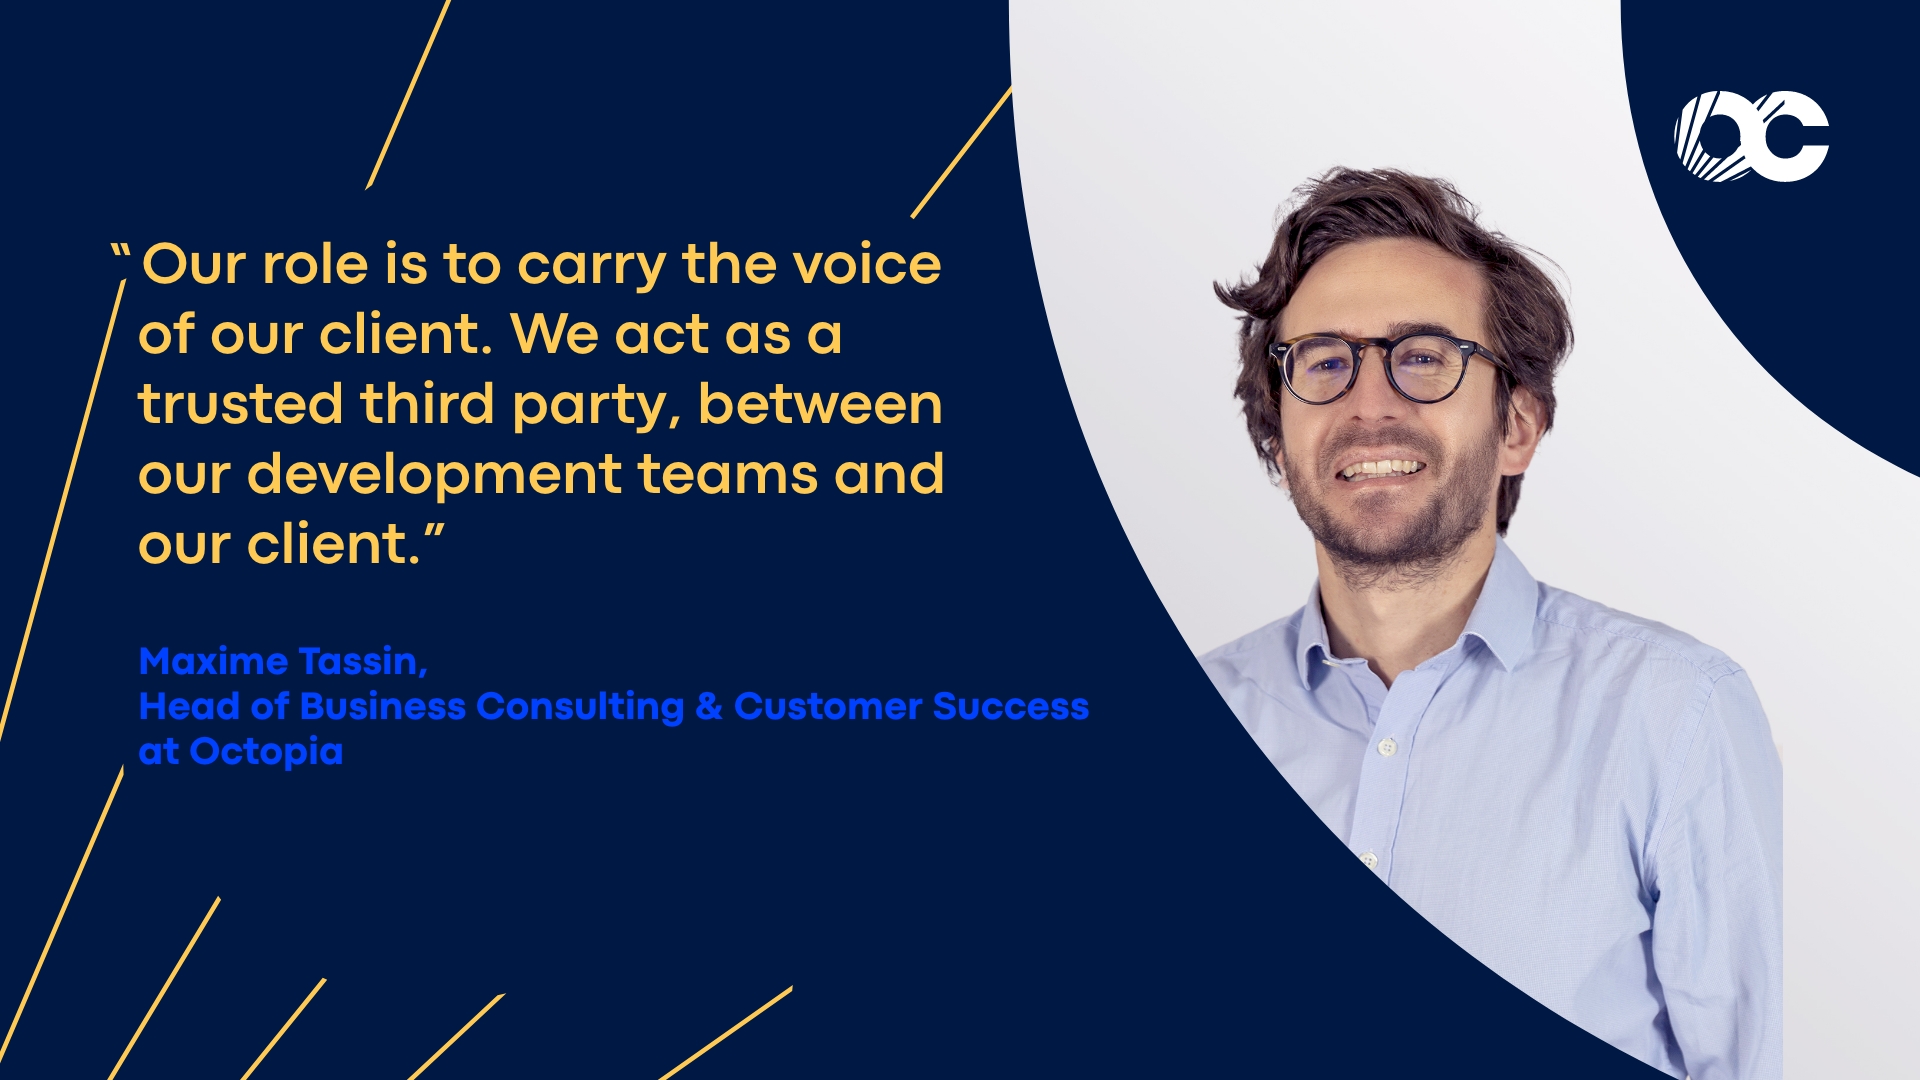 The Customer’s Voice through Business Consulting and Customer Success